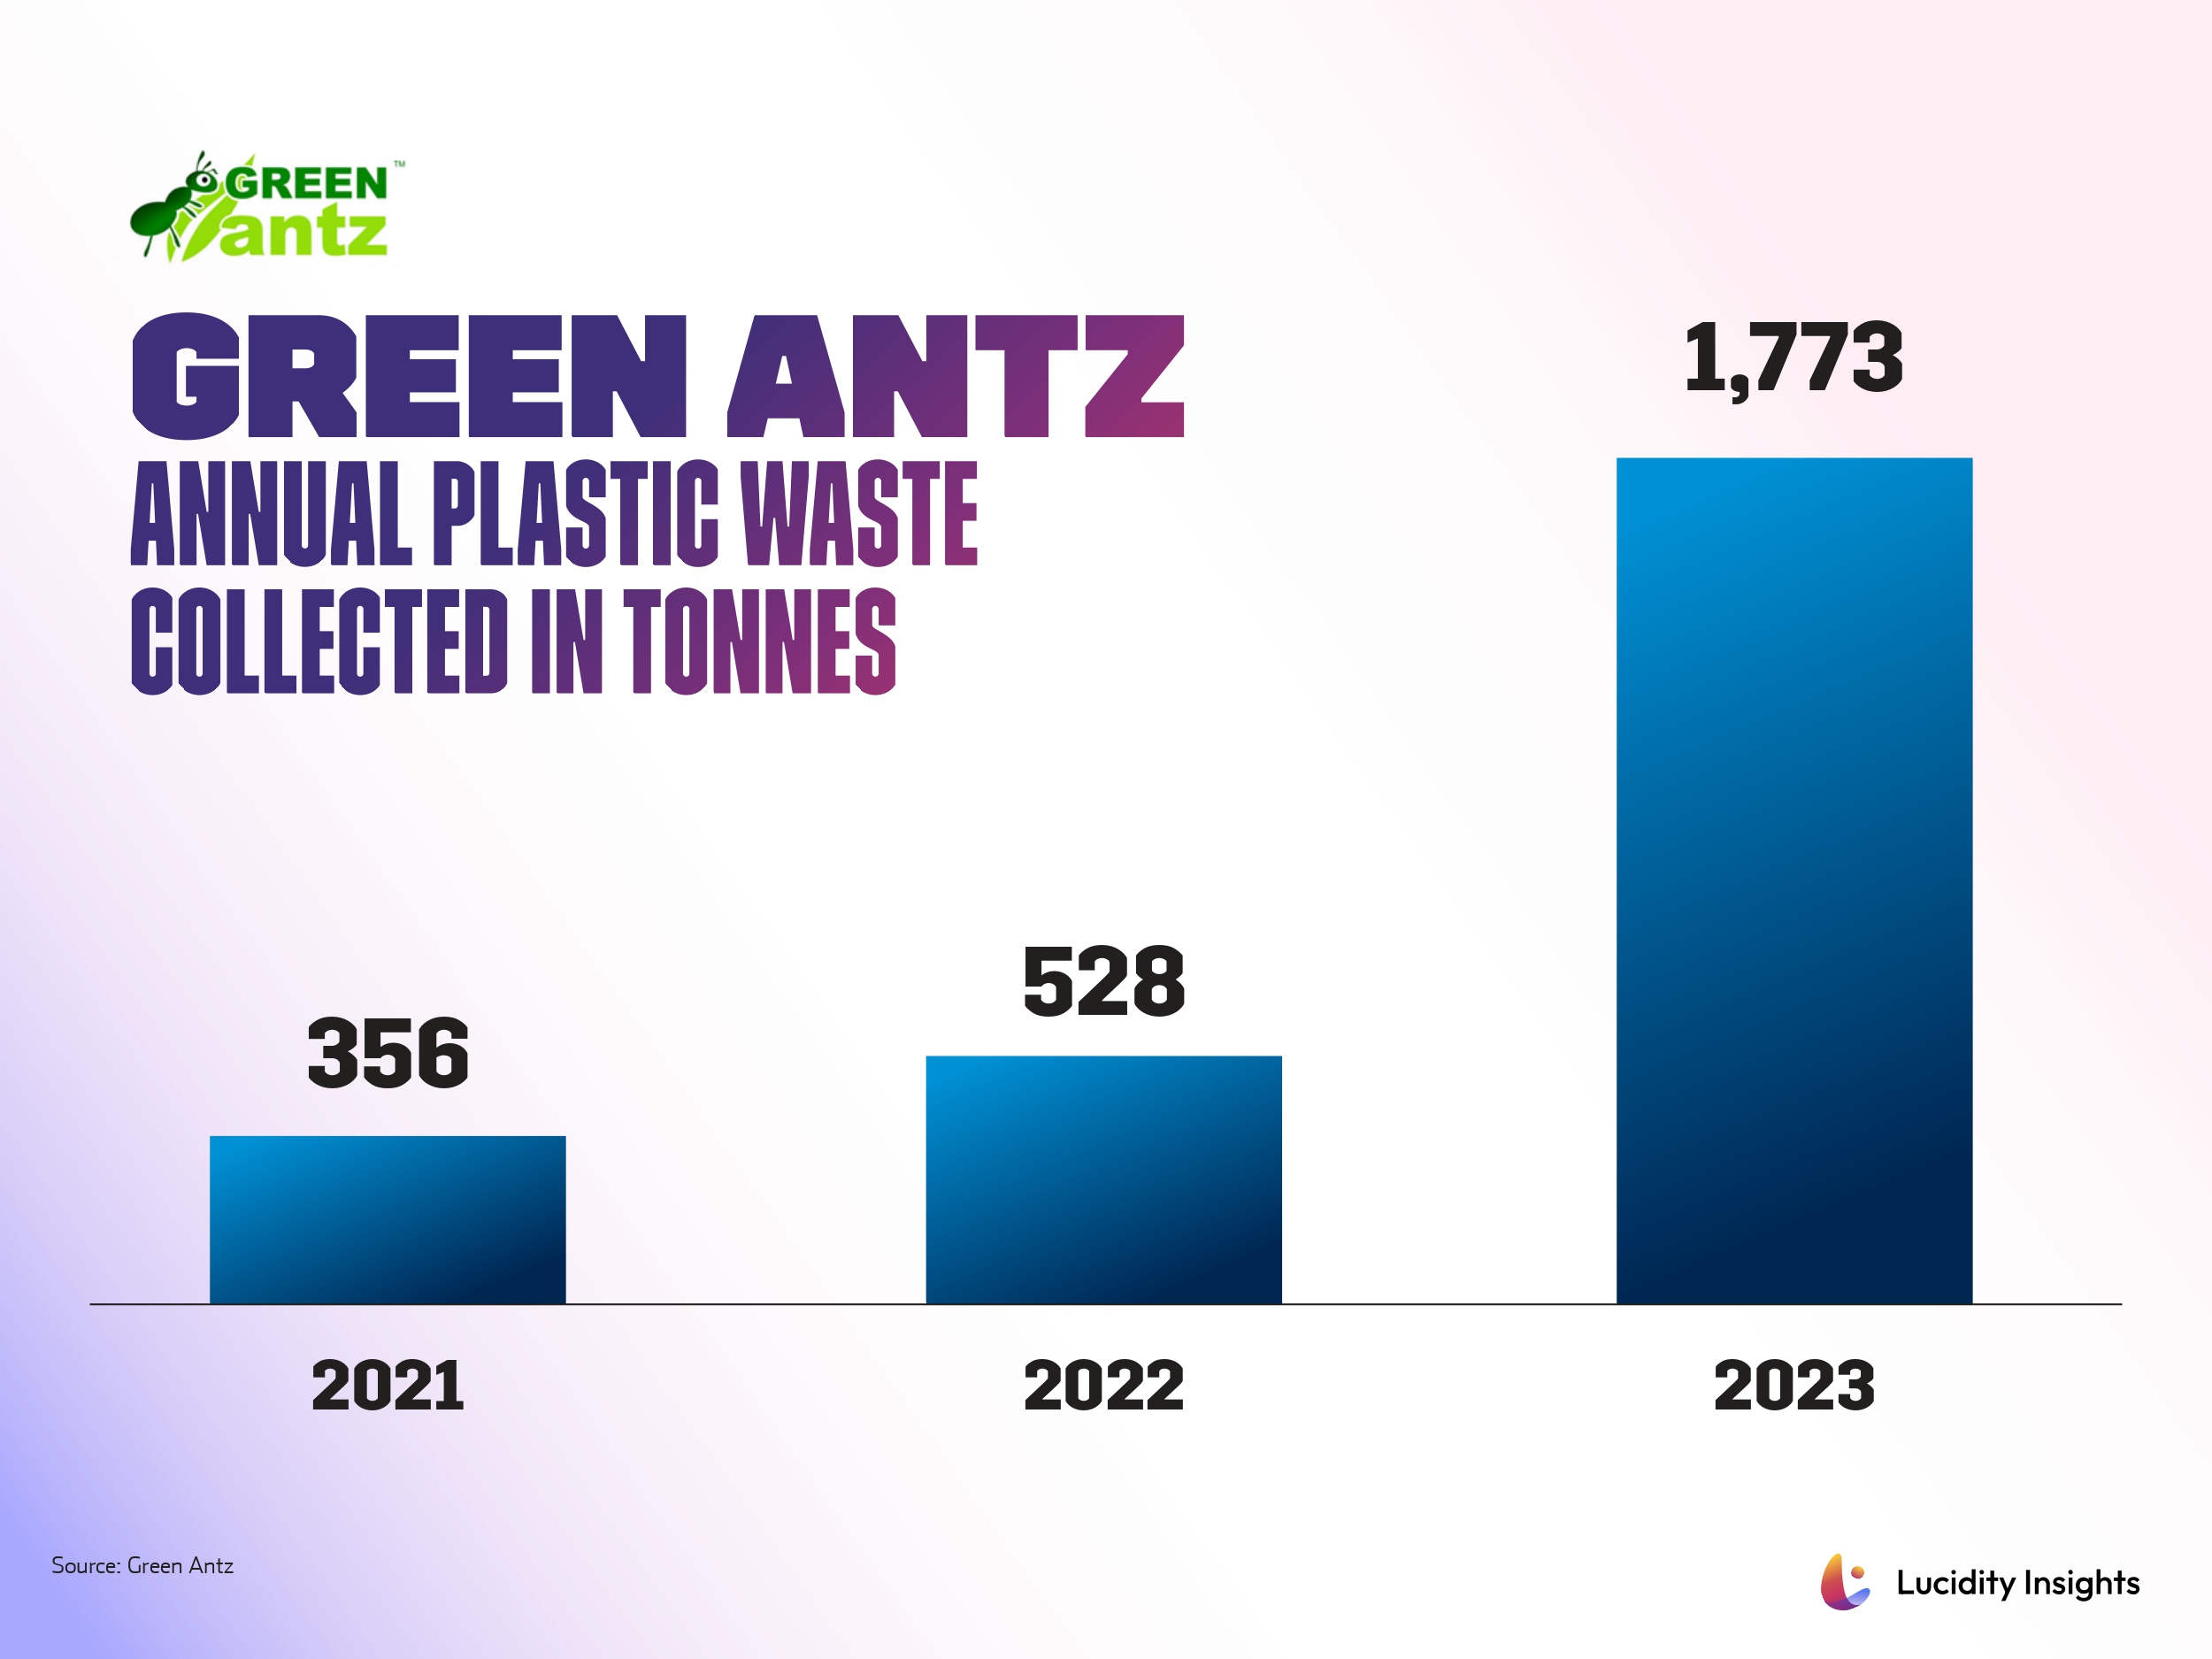 Green Antz Annual Plastic Waste Collected in Tonnes